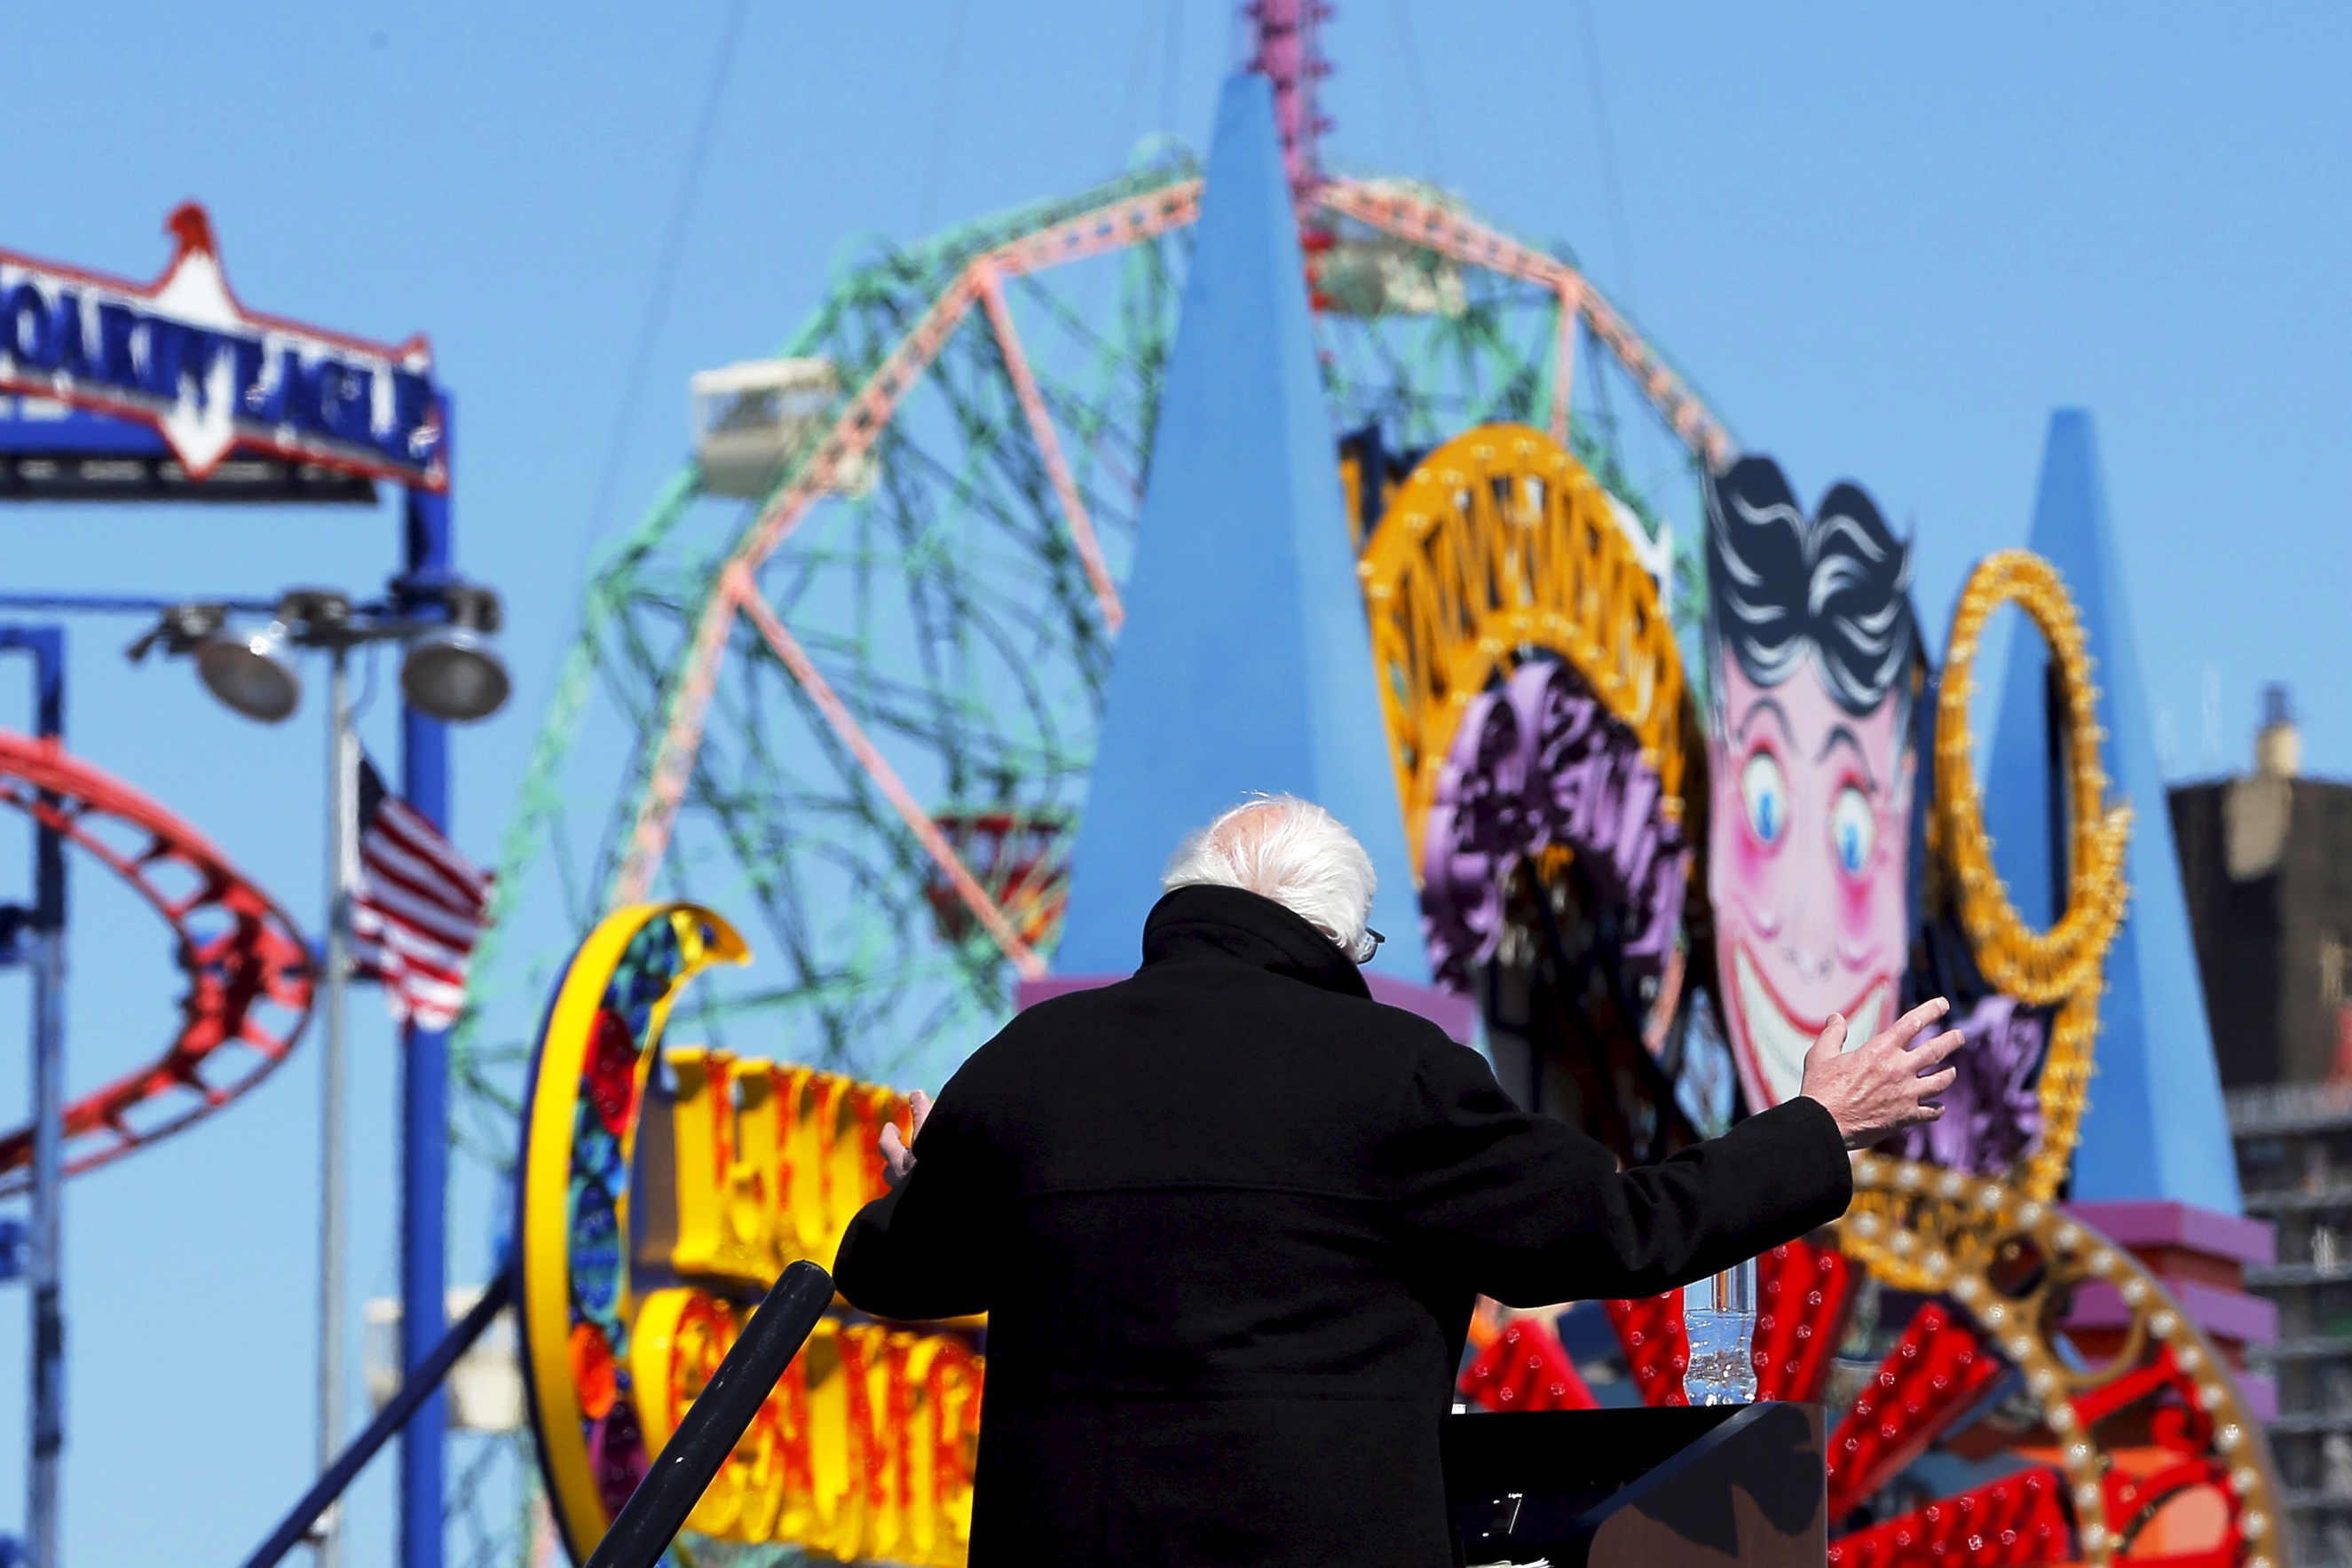 Democratic presidential candidate, Vermont Sen. Bernie Sanders speaks at a campaign rally on the boardwalk in Coney Island, New York on April 10, 2016.